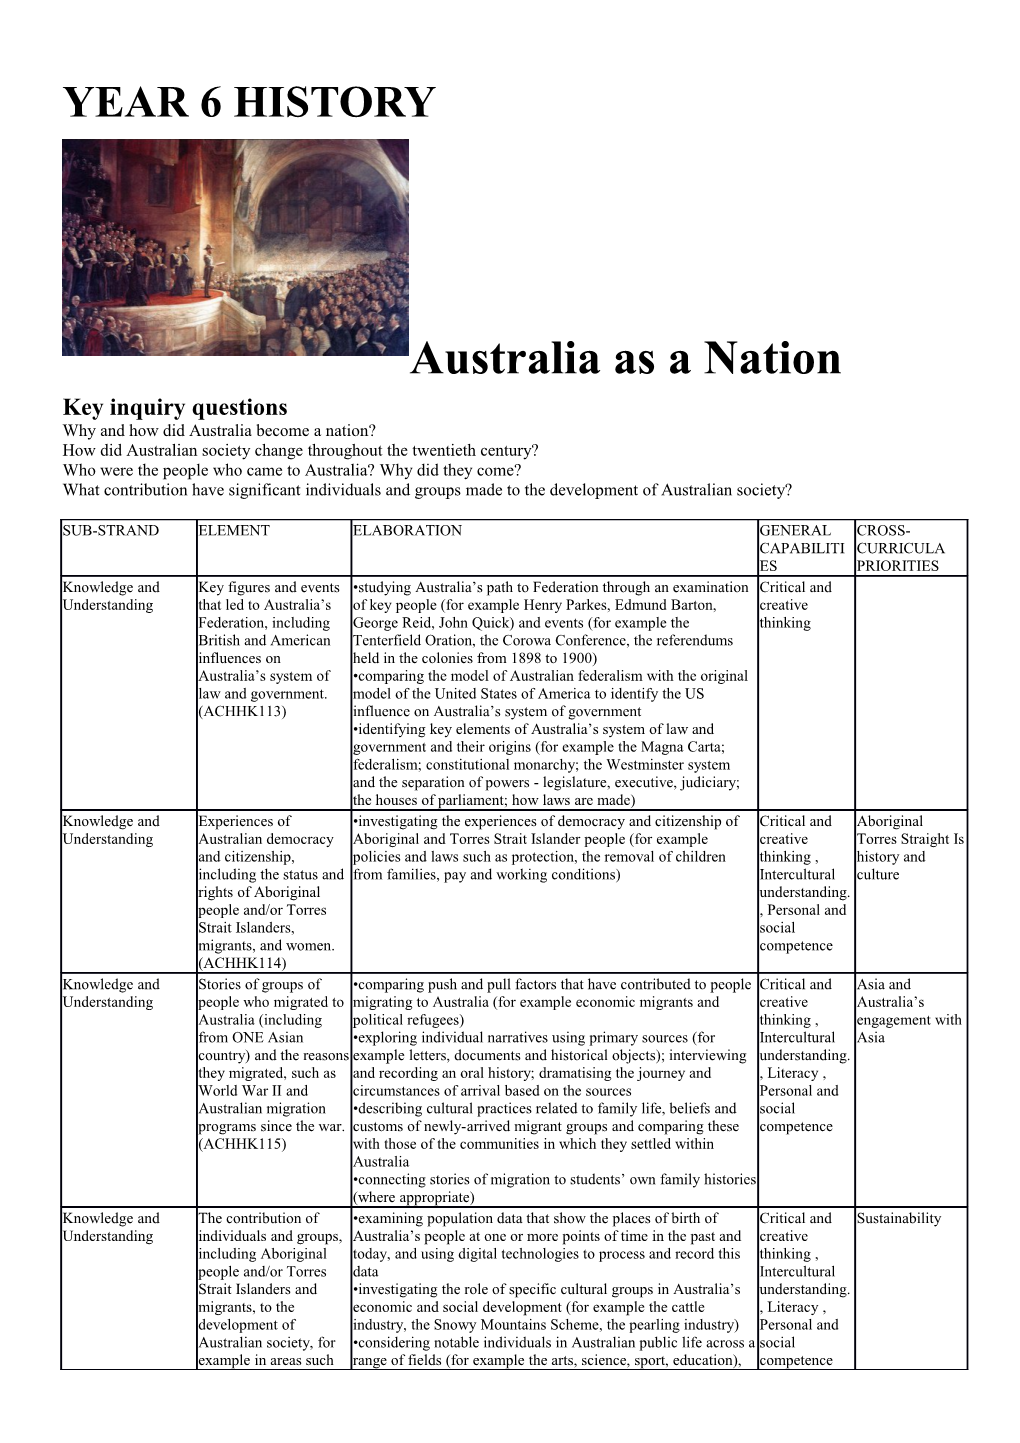 Why and How Did Australia Become a Nation?